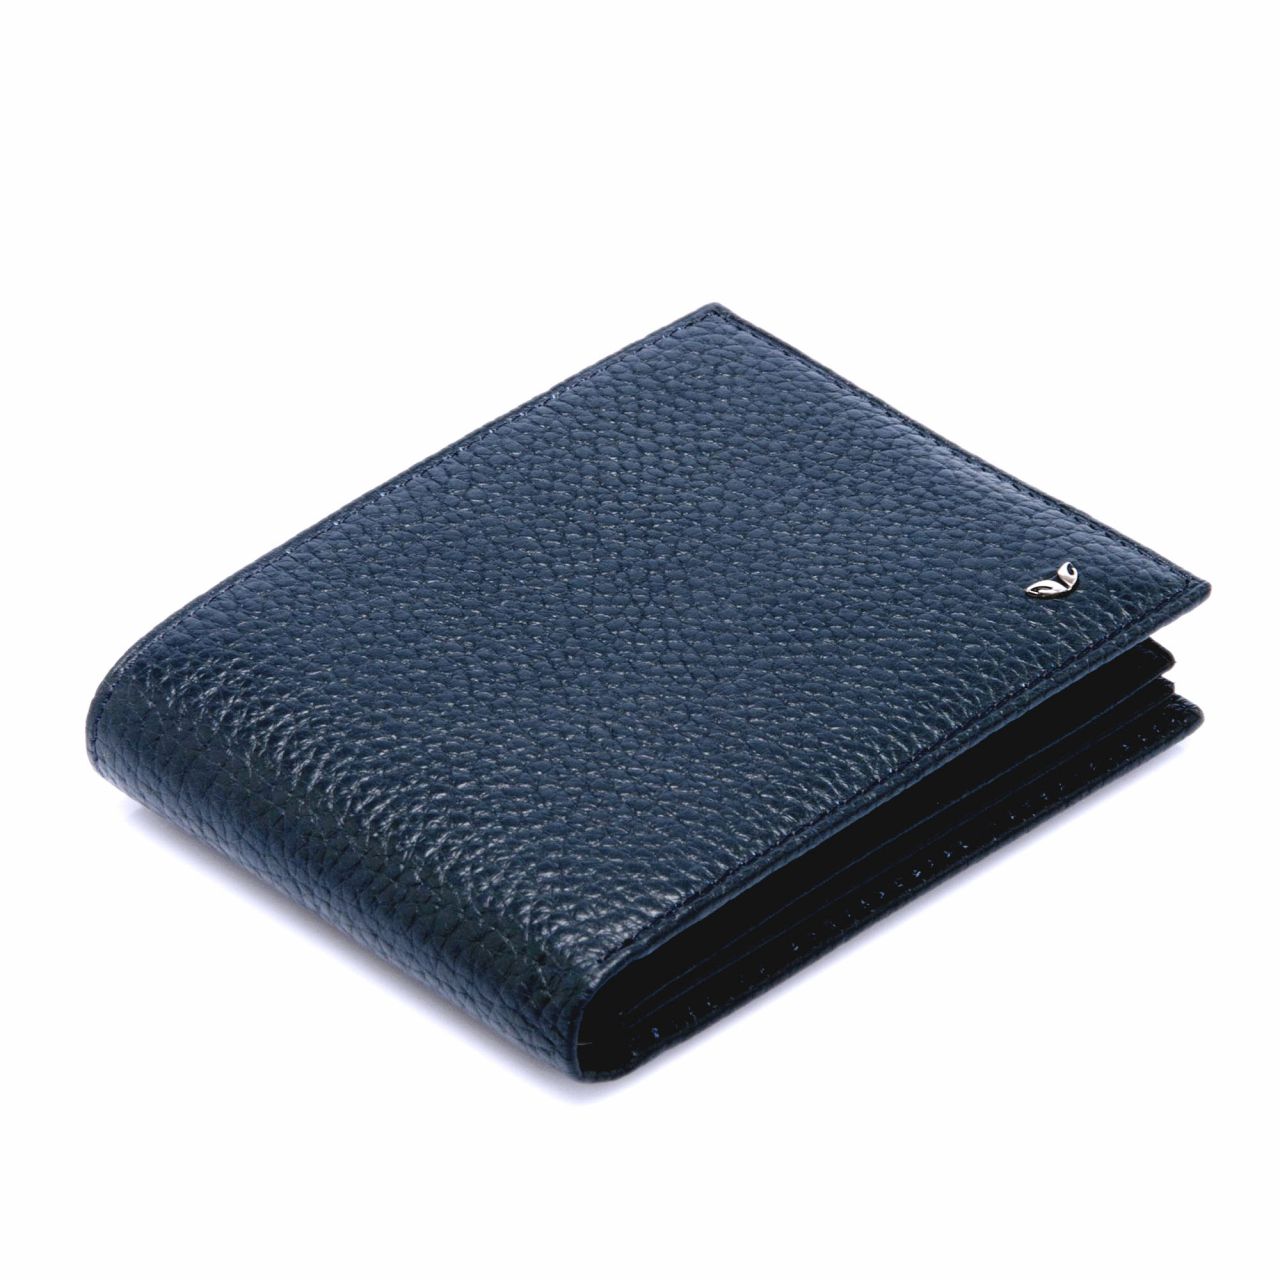 Leather wallet in navy blue